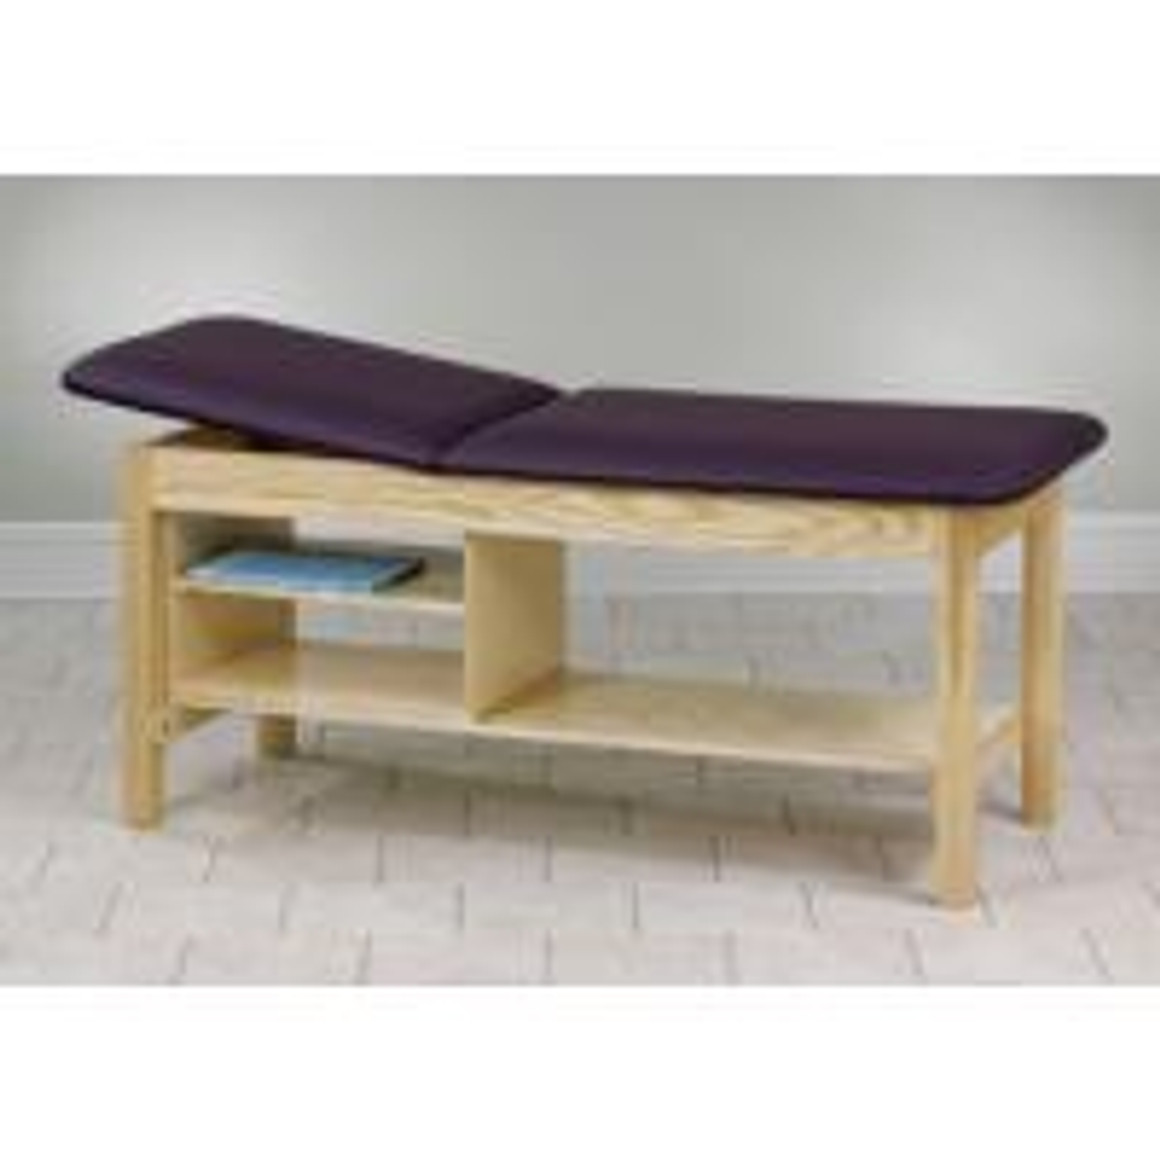 Clinton Classic Series Straight Line Treatment Table with Shelving Unit, 27" Wide, Aubergine